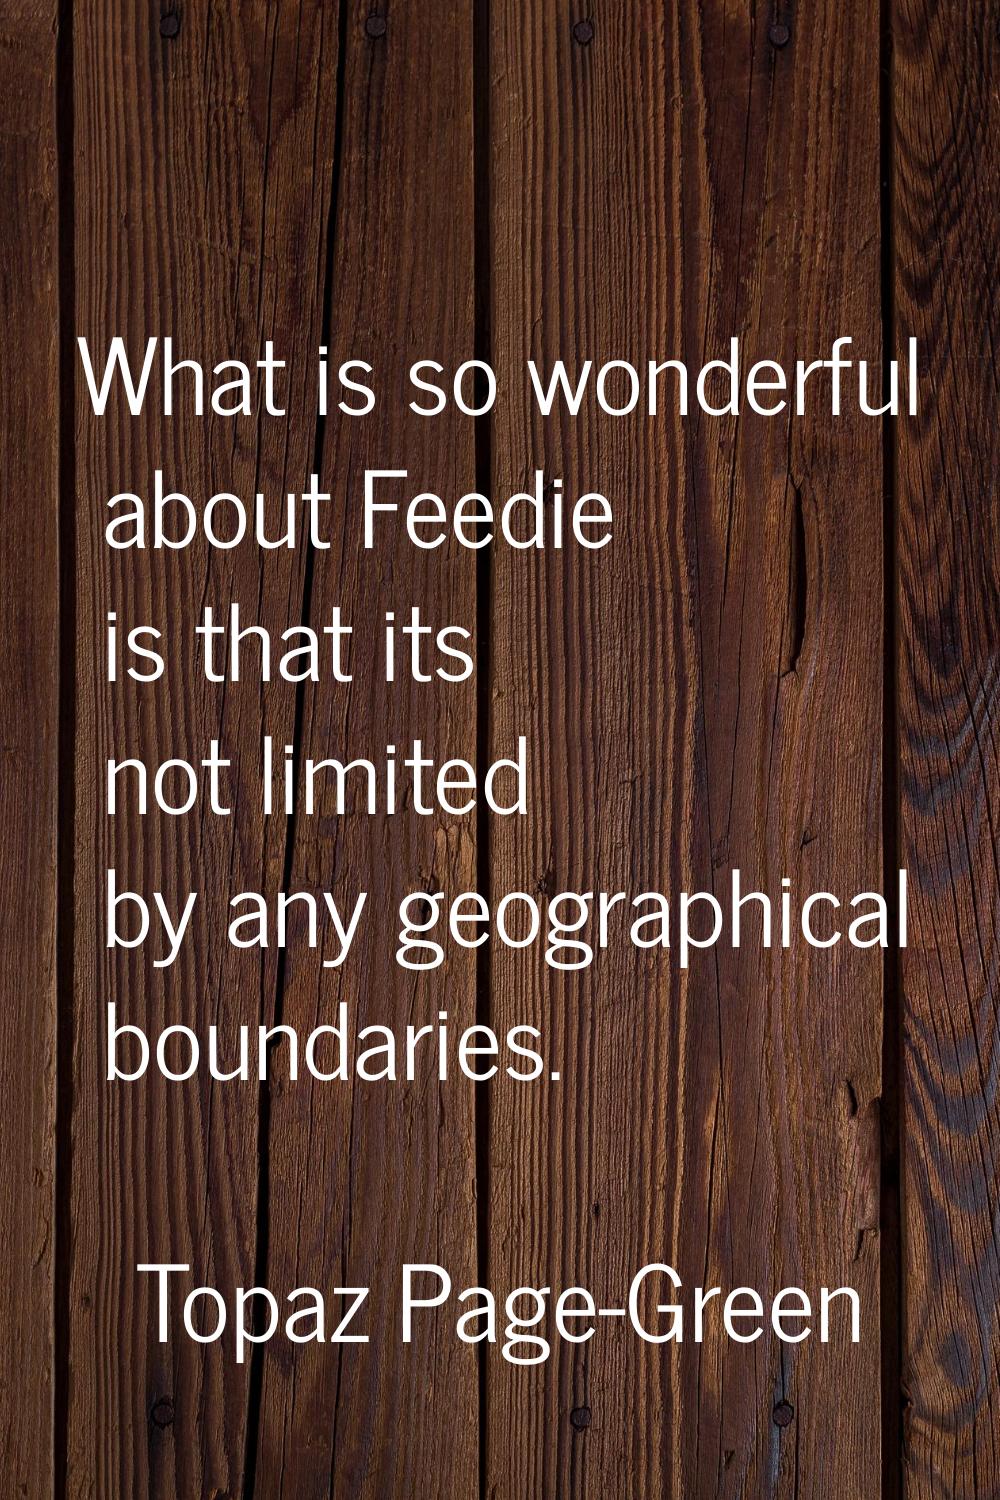 What is so wonderful about Feedie is that its not limited by any geographical boundaries.